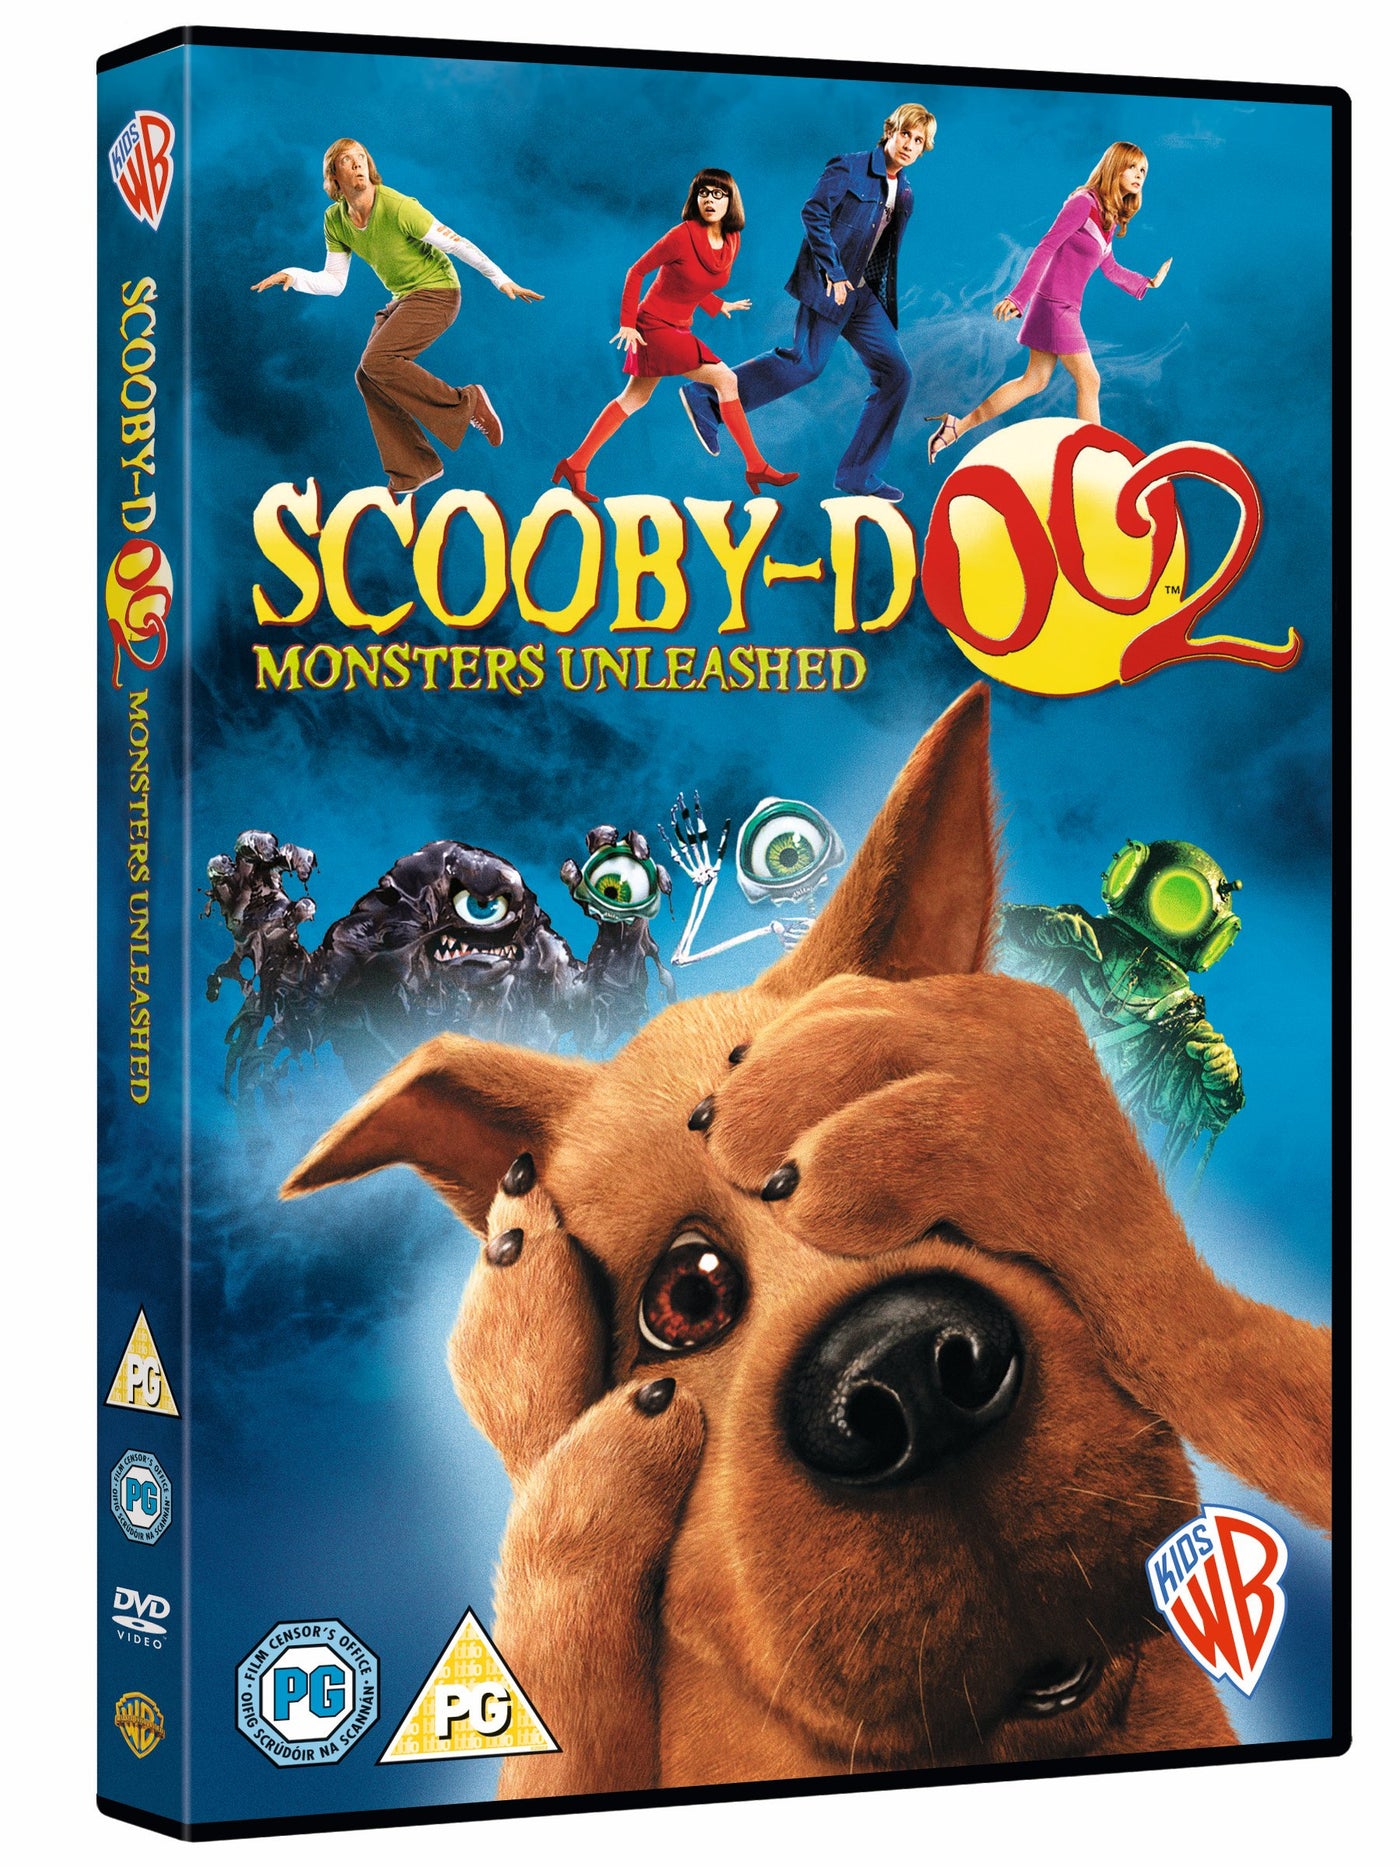 Scooby-Doo 2 - Monsters Unleashed [2004] (DVD)